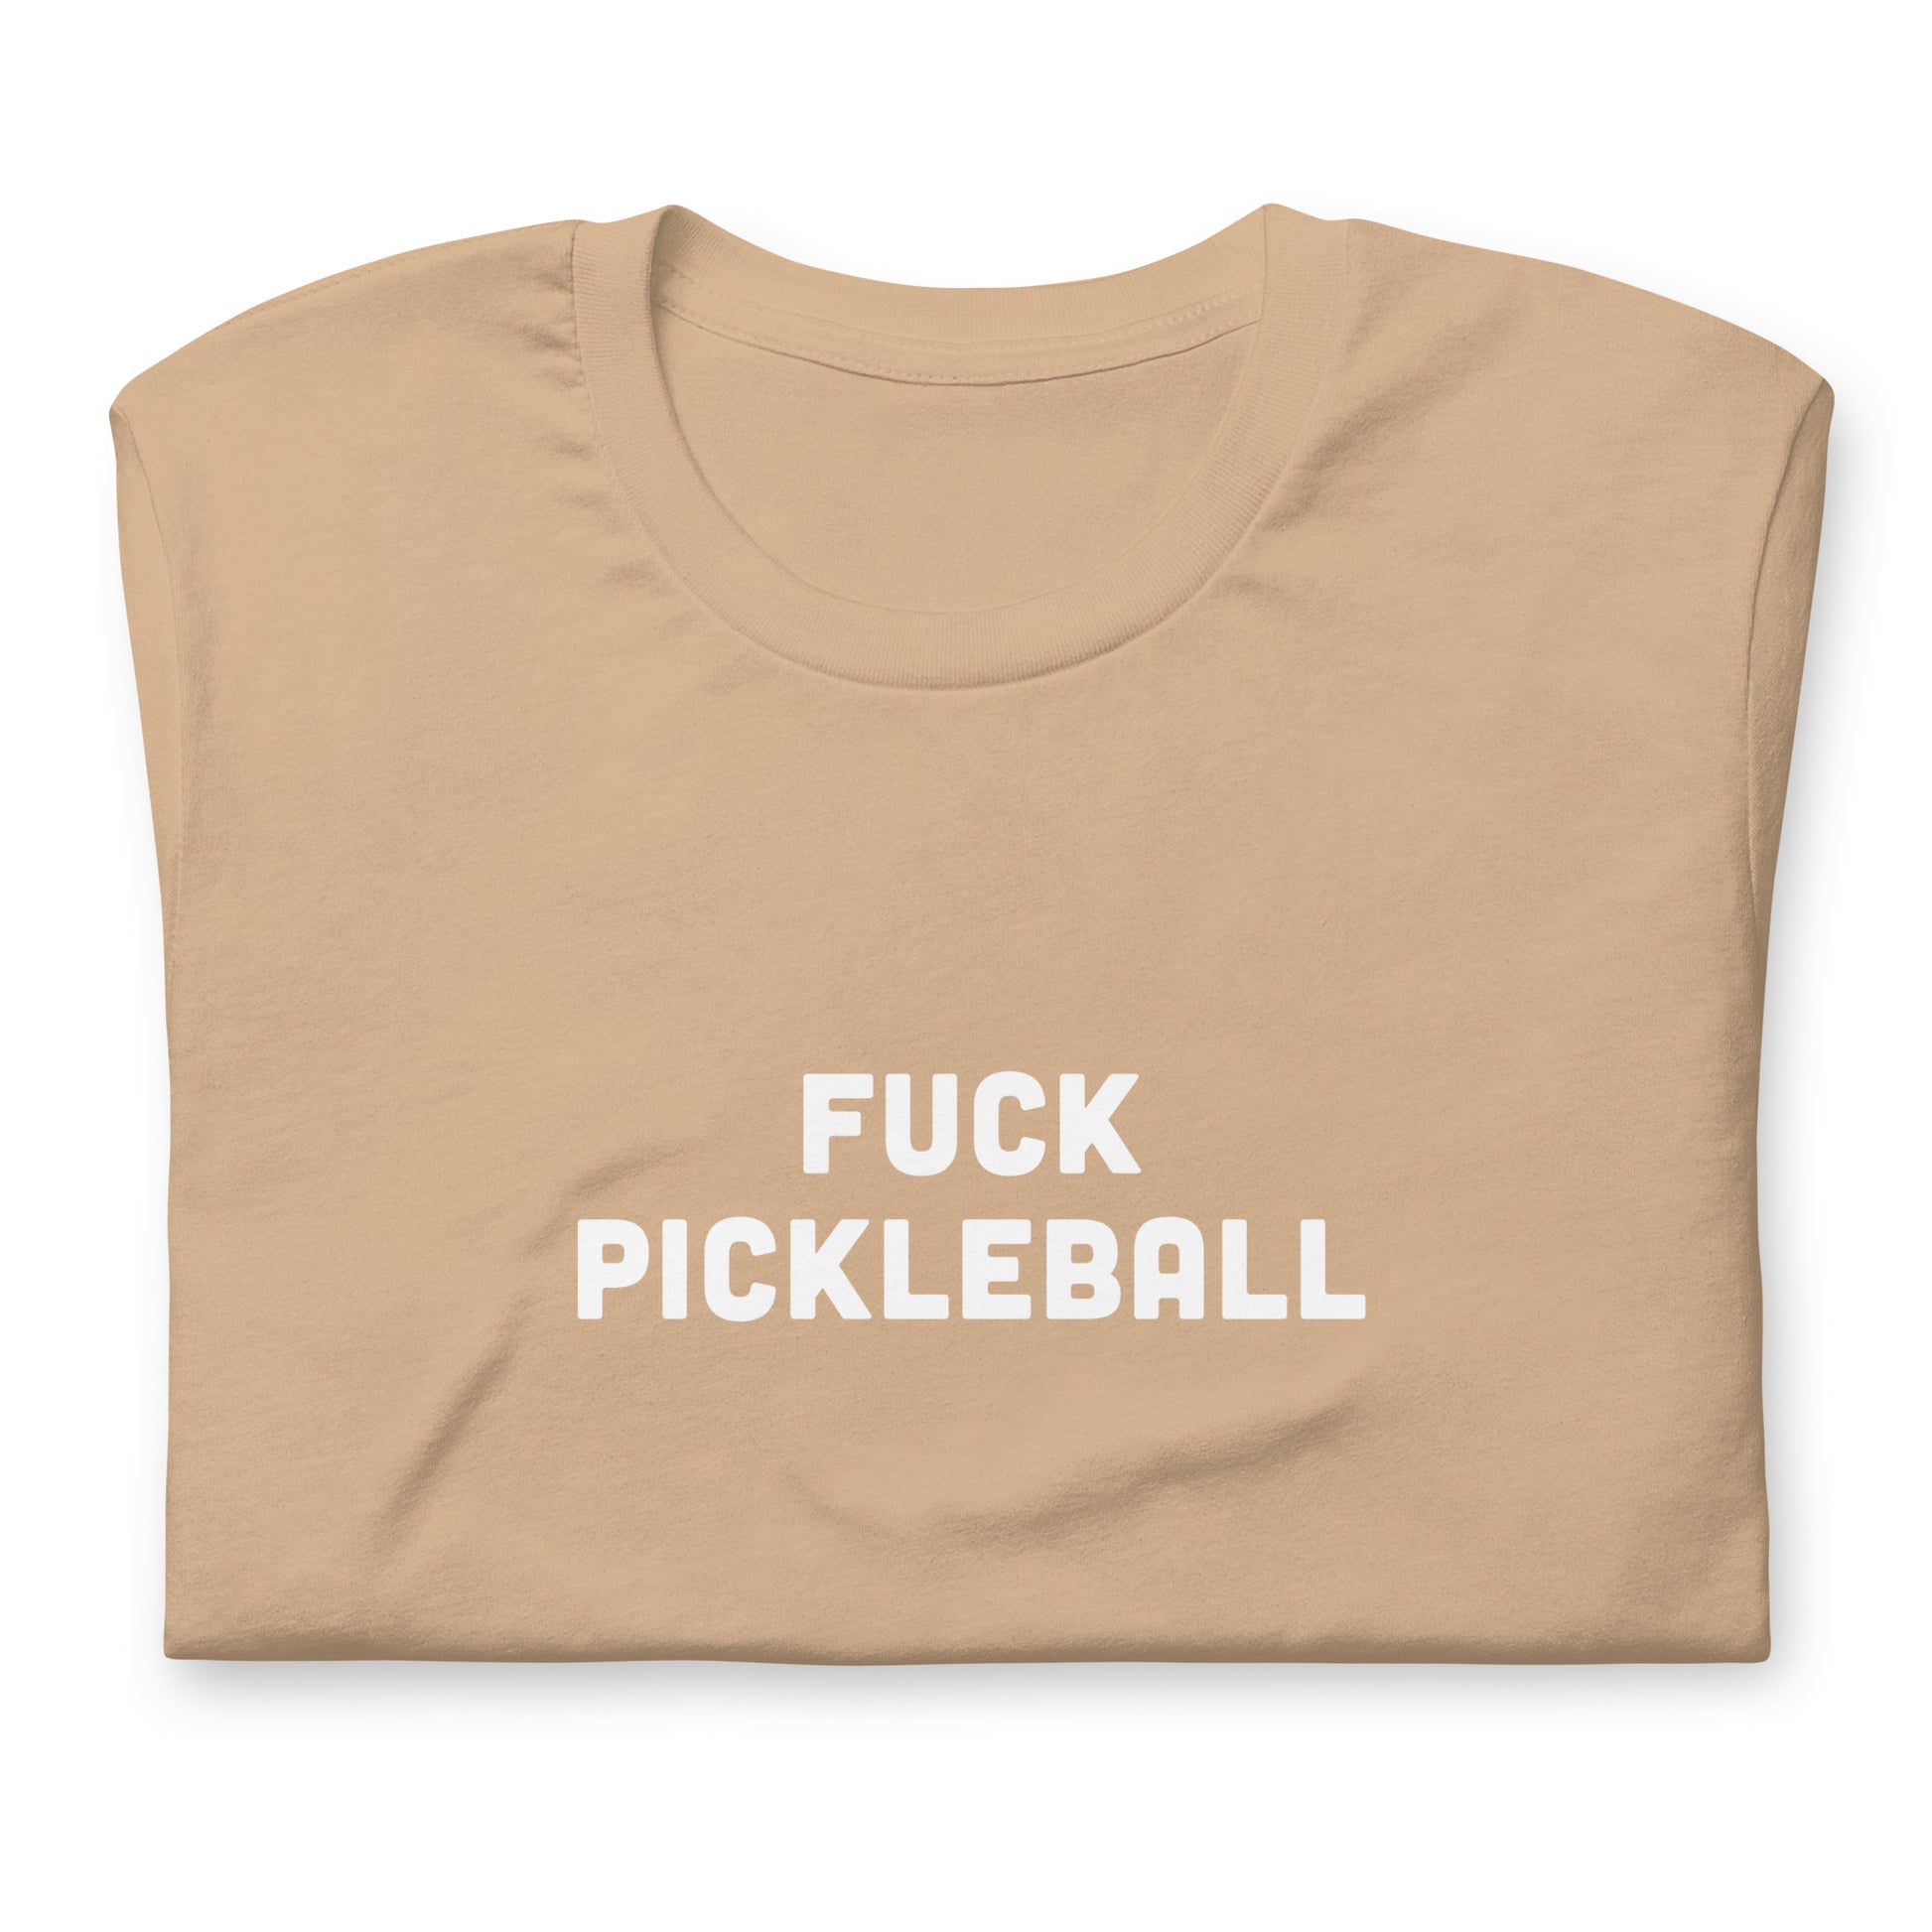 Fuck Pickleball T-Shirt Size L Color Forest